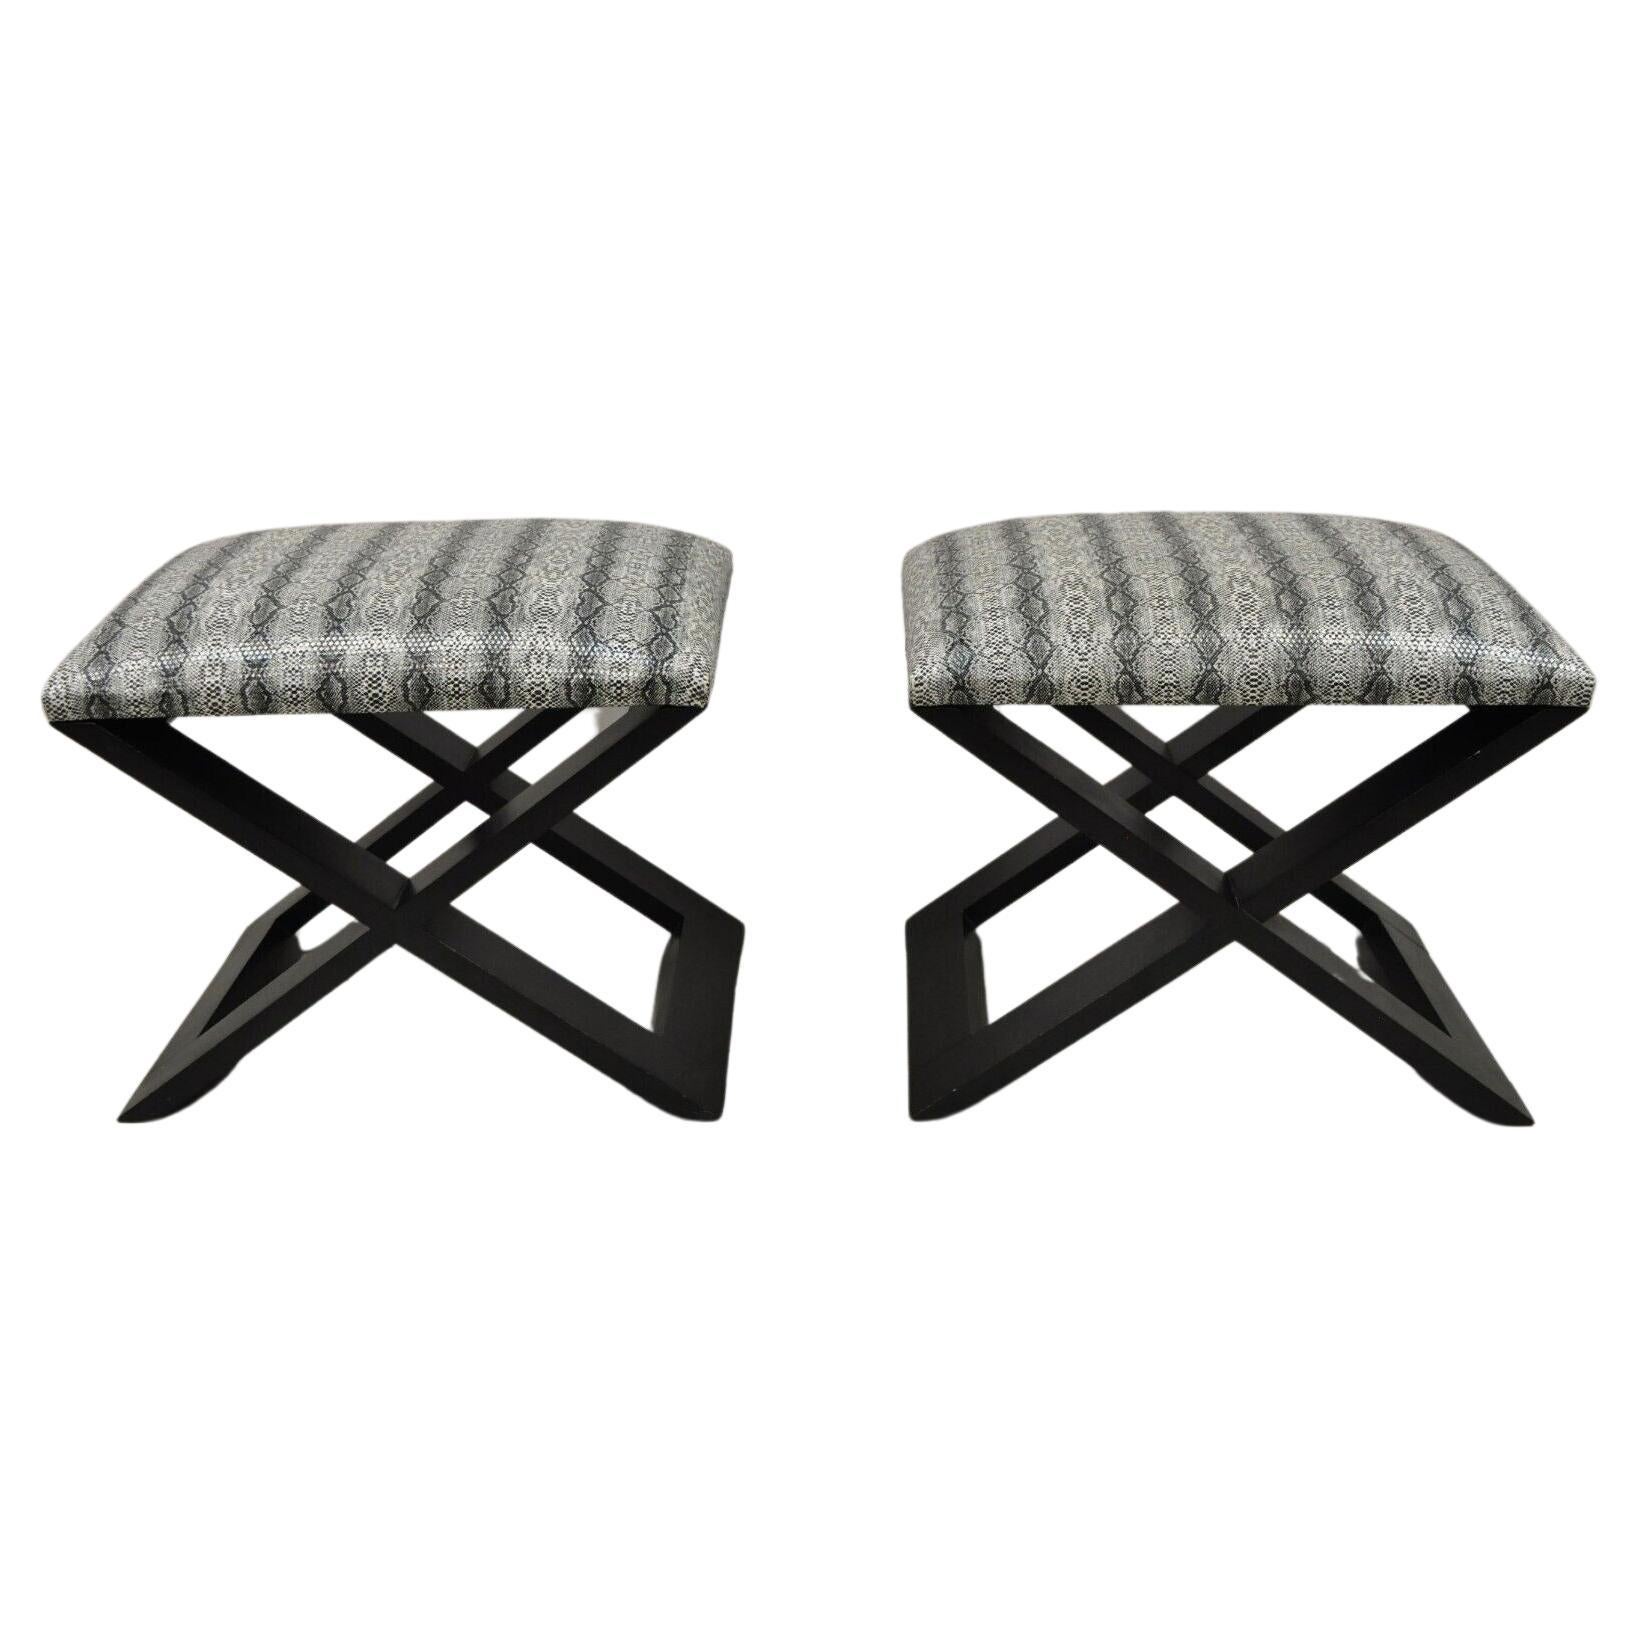 Hollywood Regency Style Black X-Frame Stools Snakeskin Upholstery, a Pair For Sale